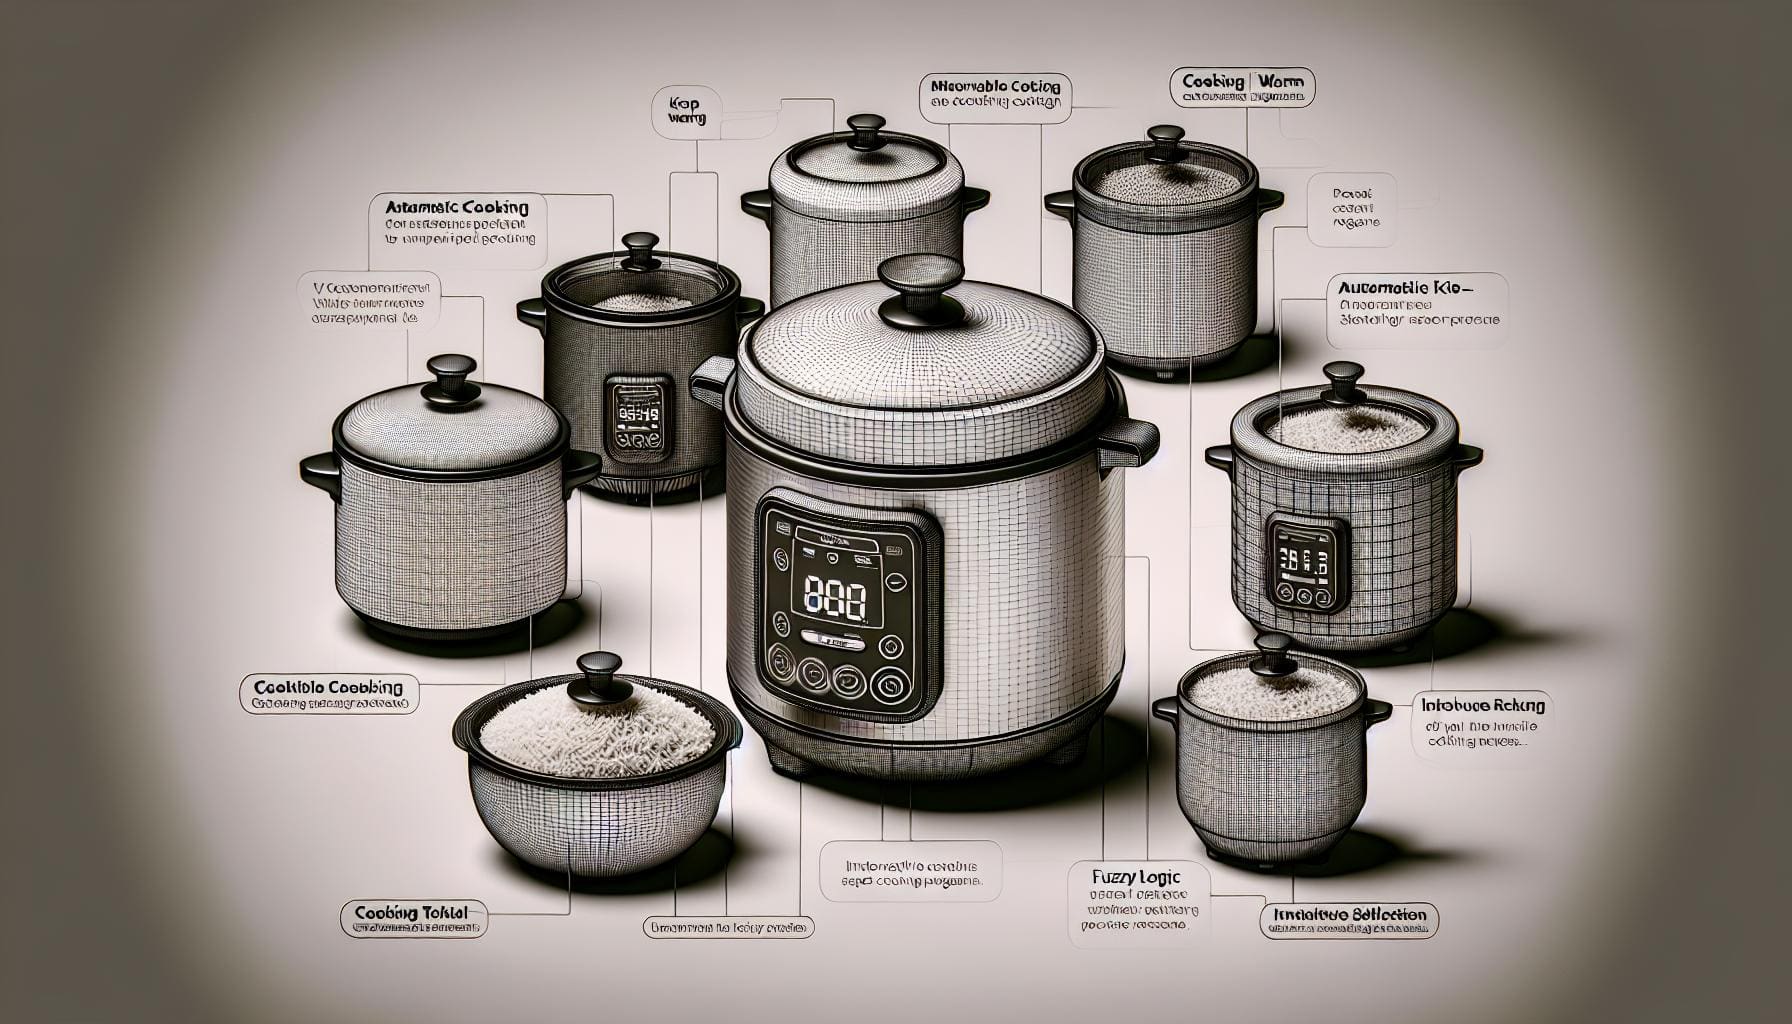 Discover the Perfect Rice Cooker with Fuzzy Logic: Top 5 Options Compared